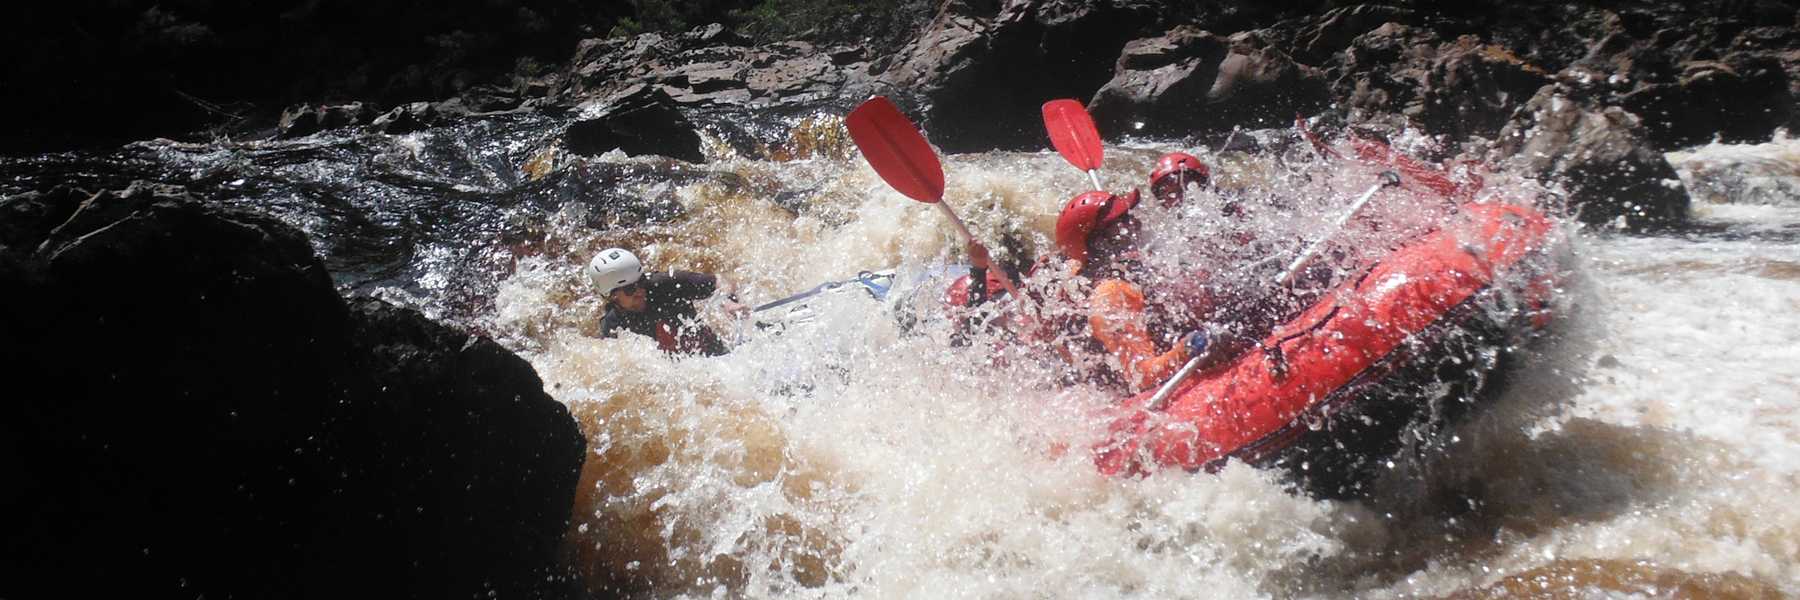 raft submerged in whitewater at Trojans rapid on the Franklin River